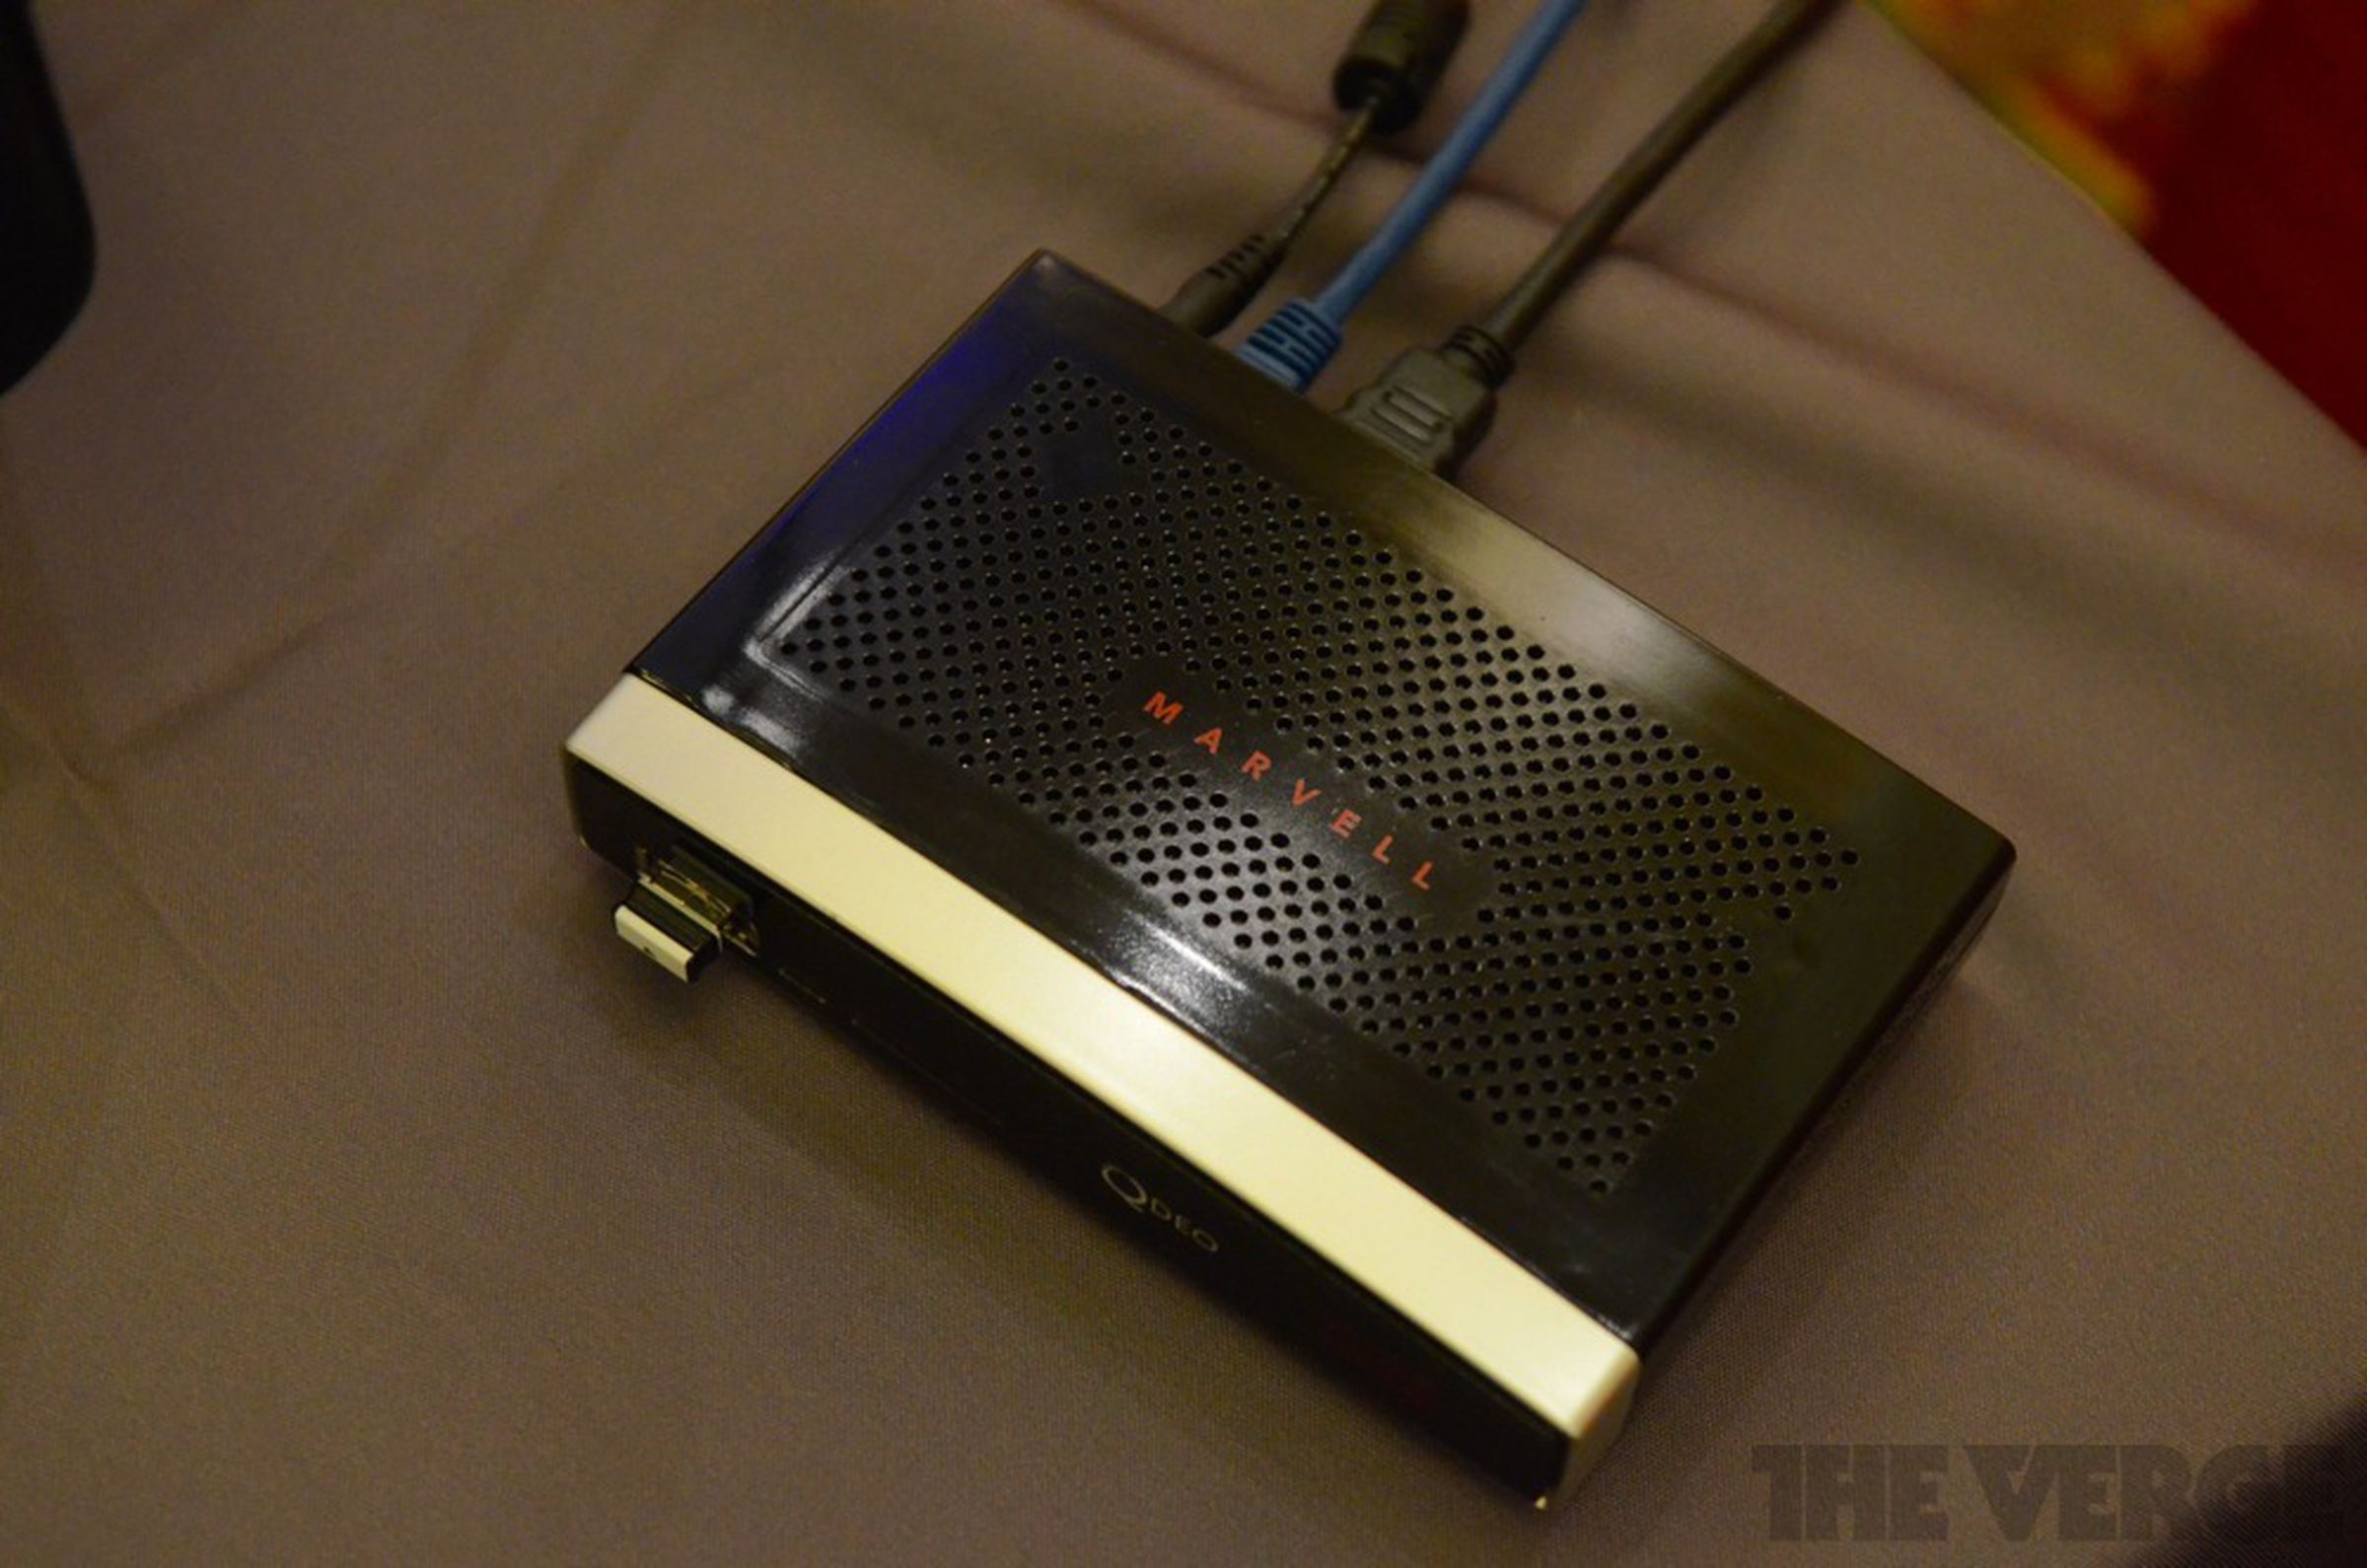 Marvell Armada 1500 for Google TV hands-on